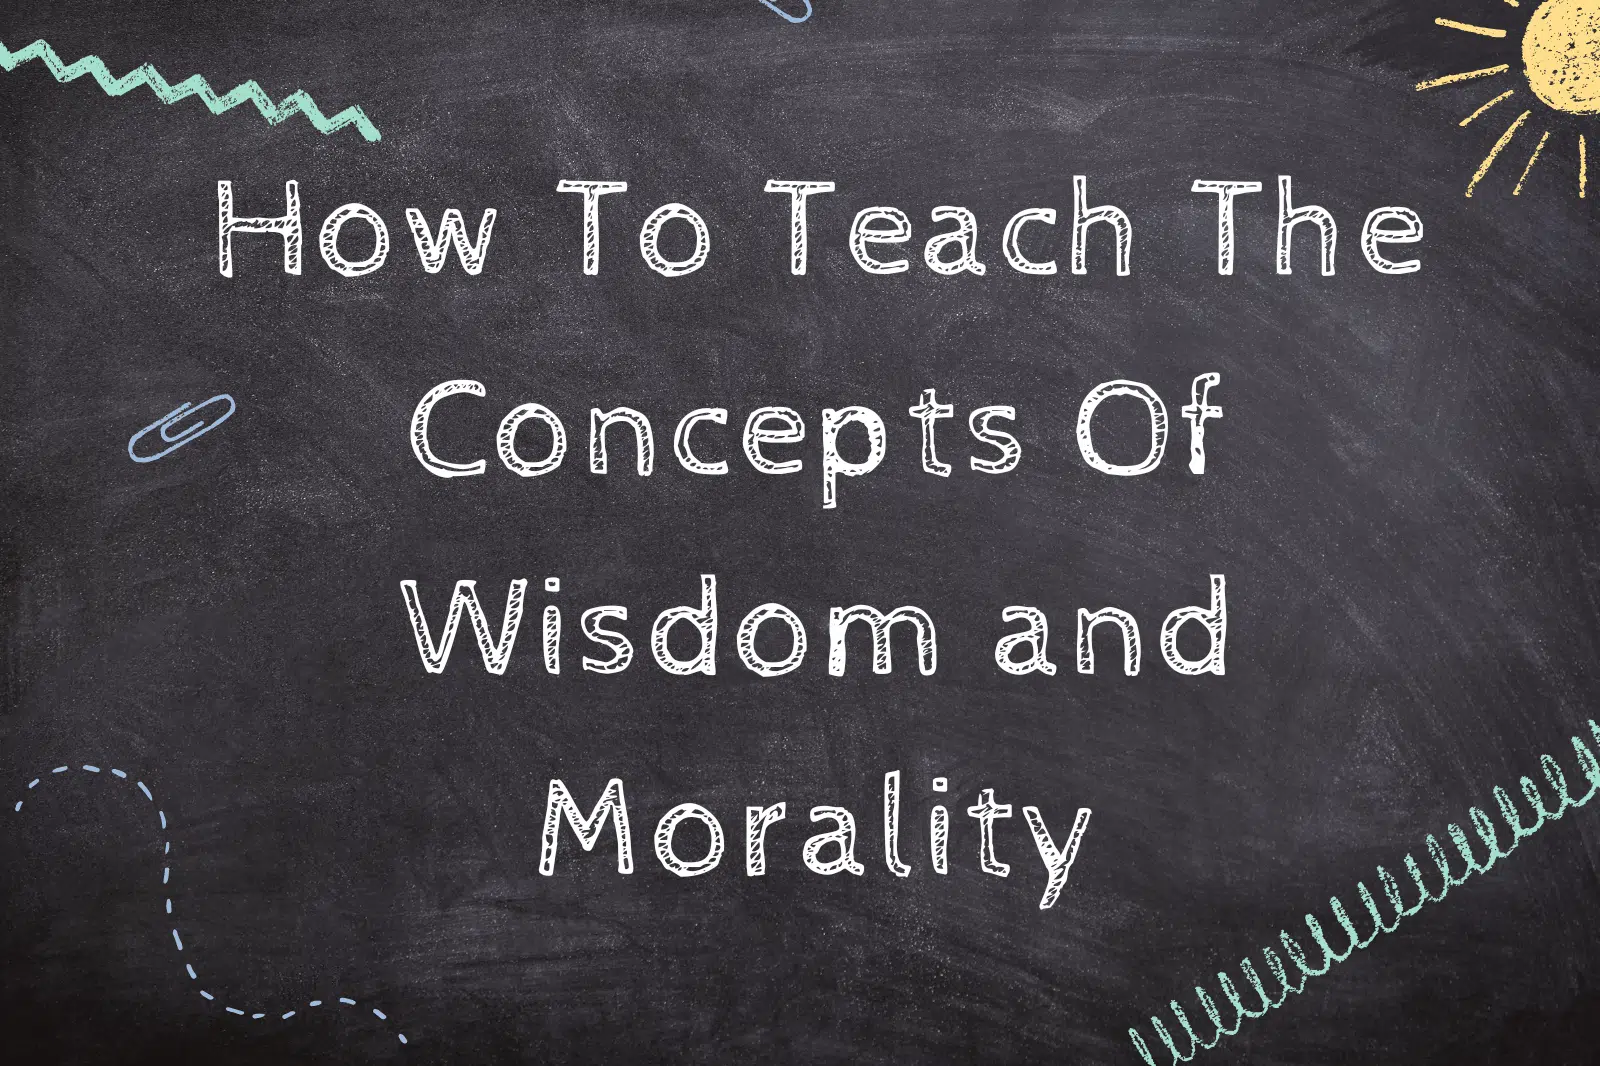 How To Teach The Concepts Of Wisdom and Morality